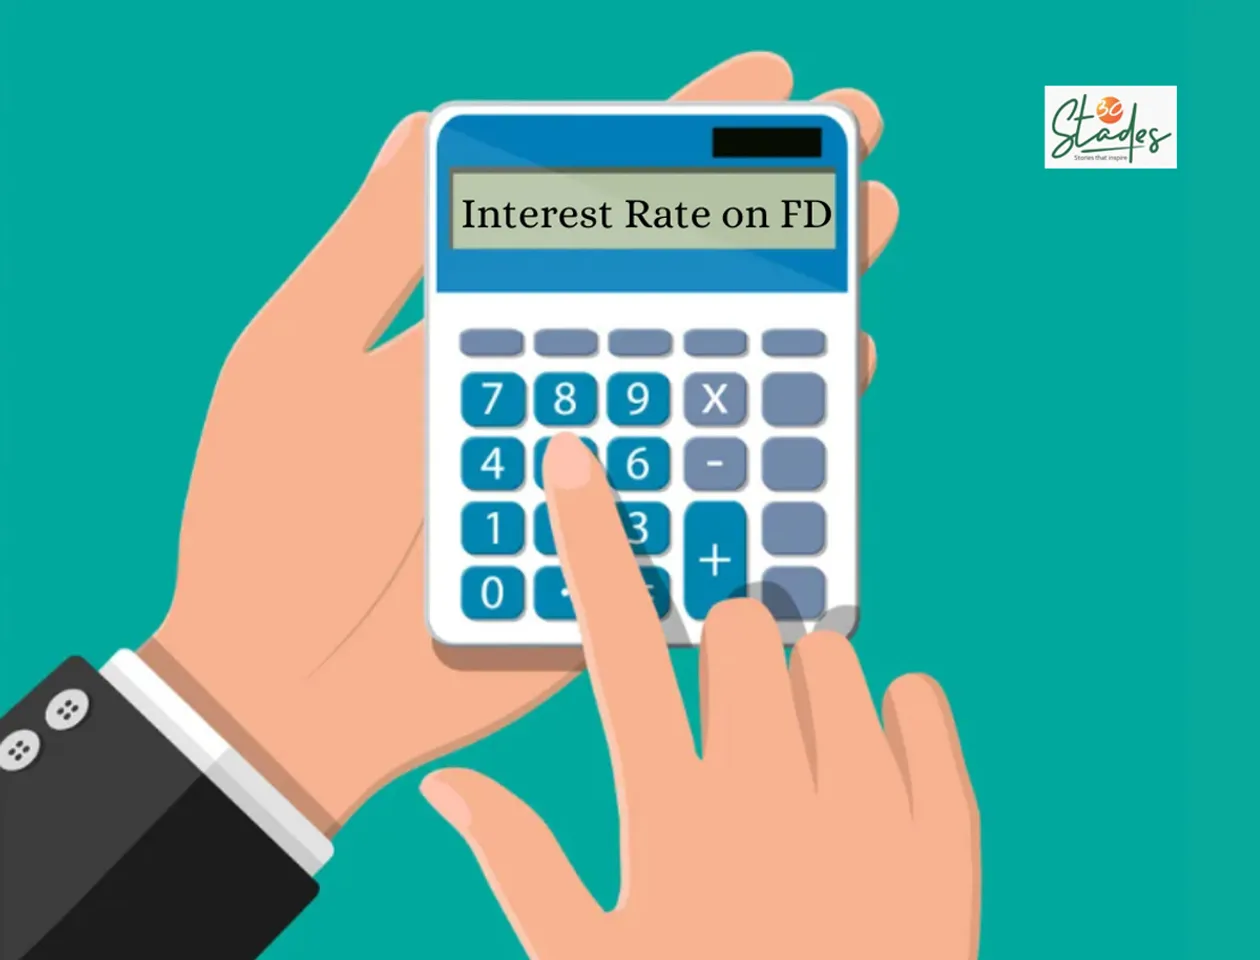 How a bank determines the interest rate on your fixed deposits